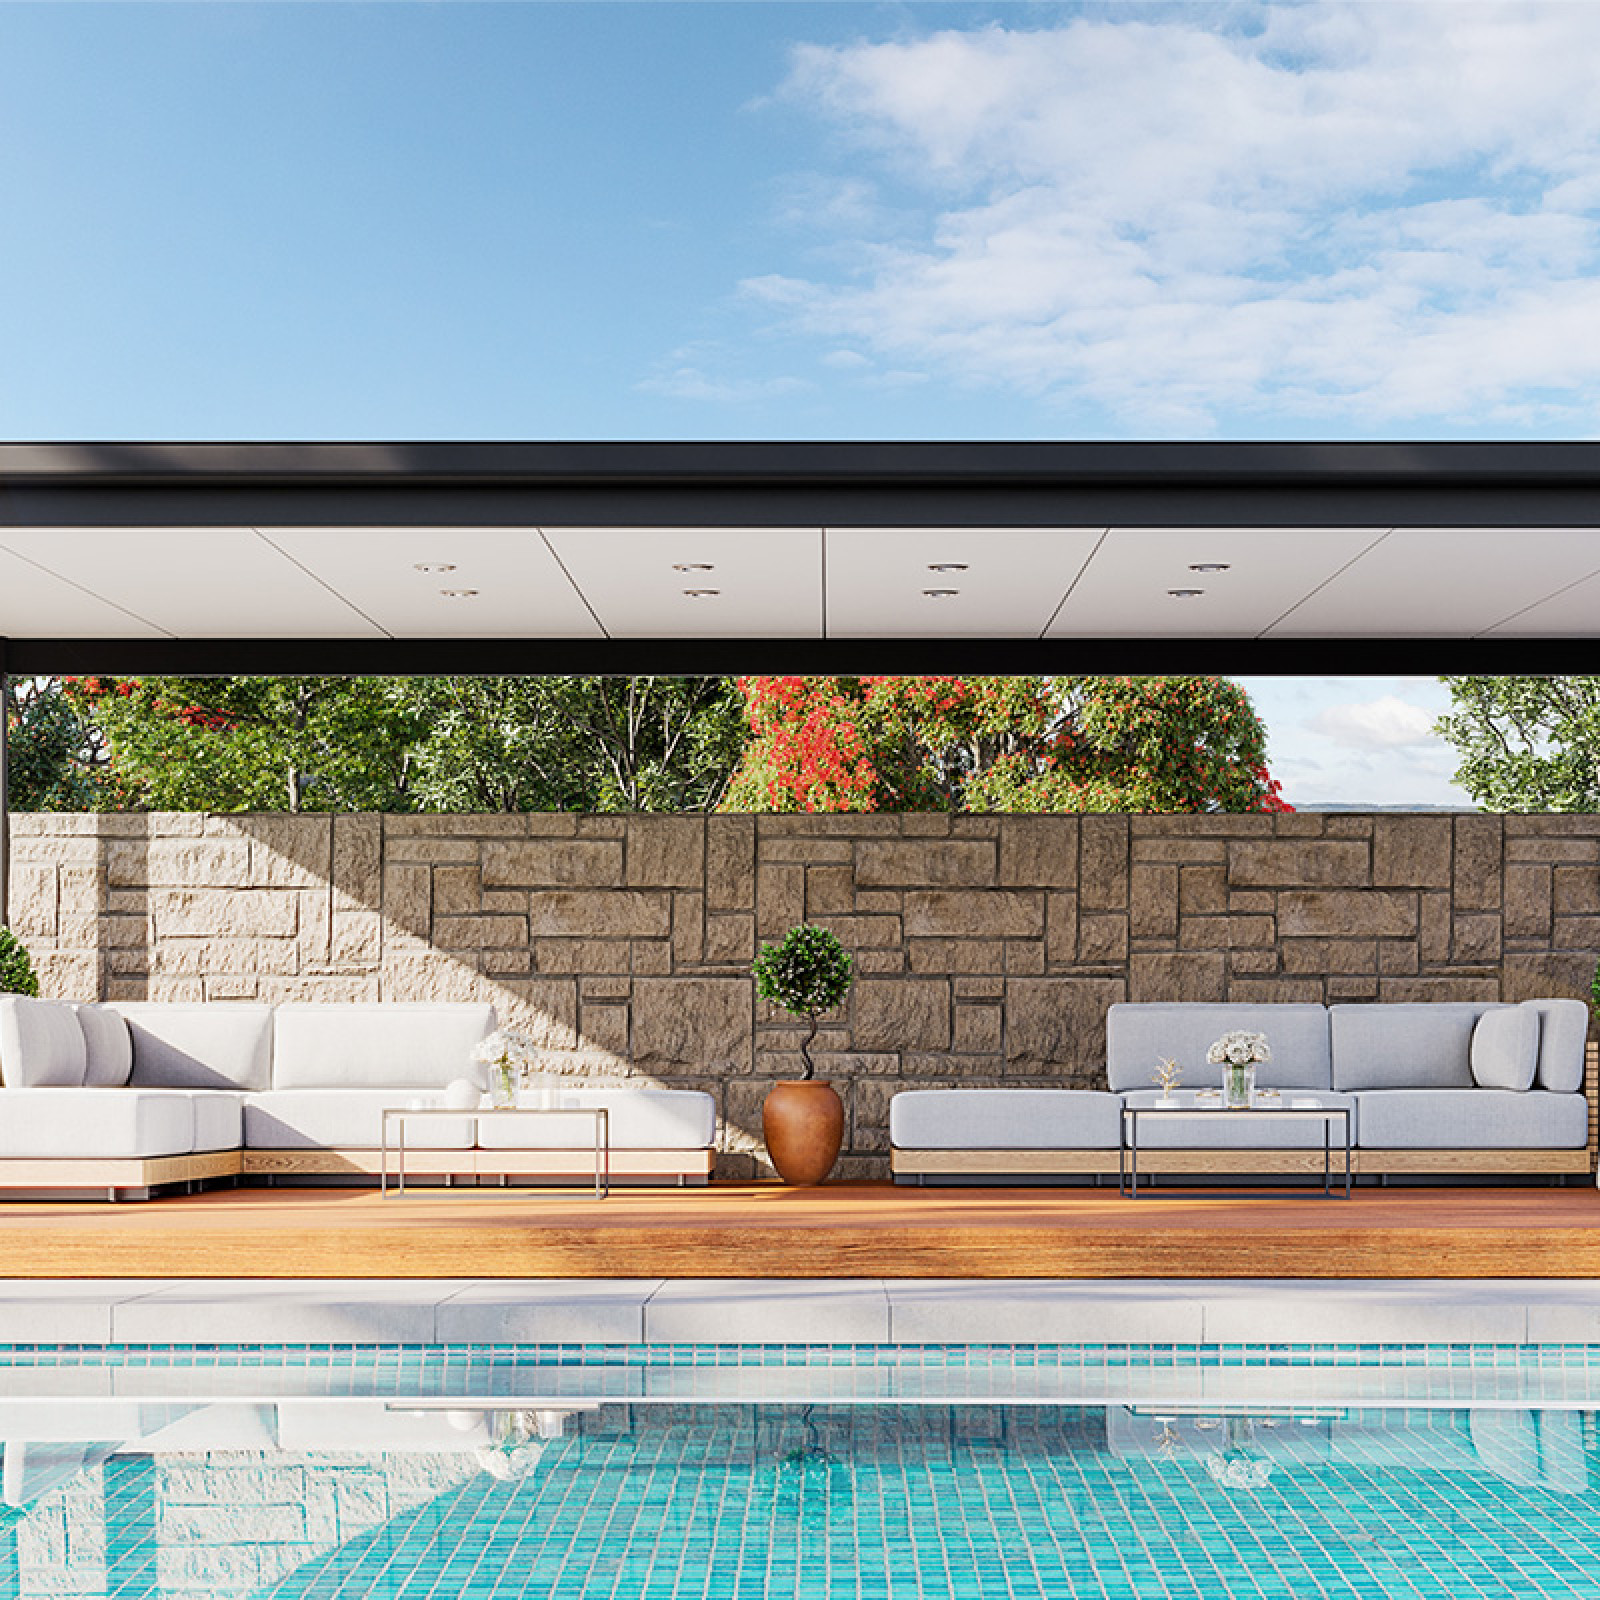 Flat roof pergola over looking a refreshing swimming pool